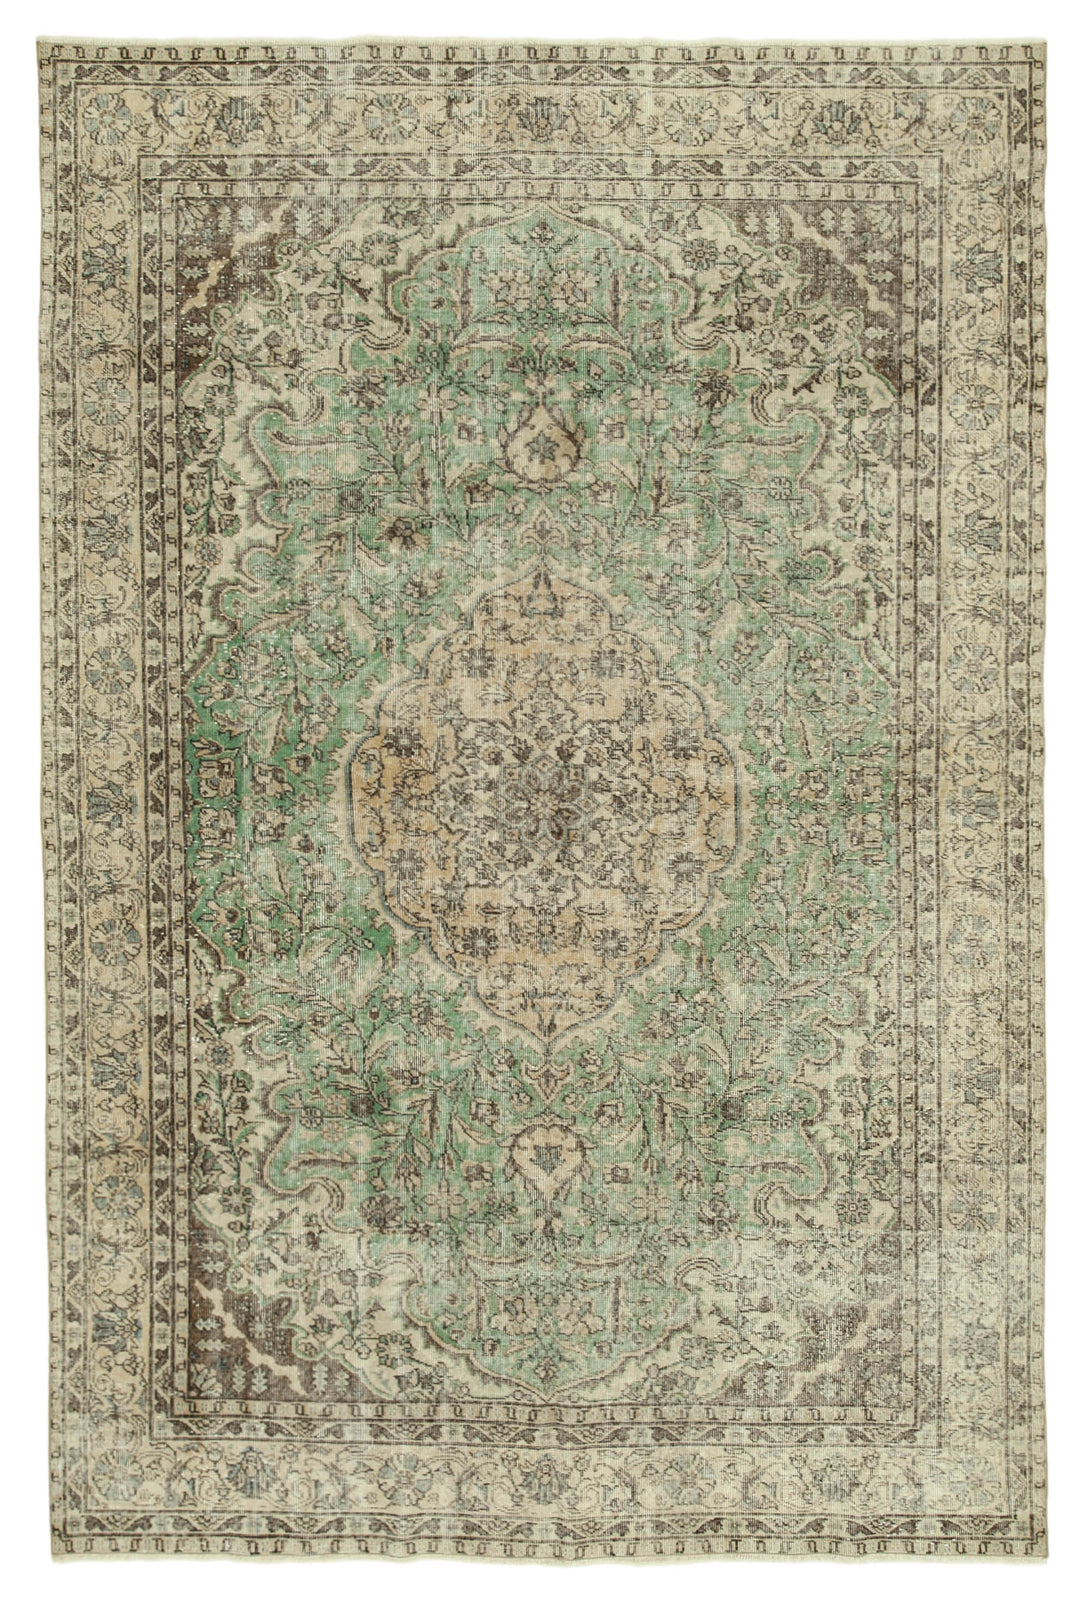 Handmade White Wash Area Rug > Design# OL-AC-36827 > Size: 6'-11" x 10'-9", Carpet Culture Rugs, Handmade Rugs, NYC Rugs, New Rugs, Shop Rugs, Rug Store, Outlet Rugs, SoHo Rugs, Rugs in USA